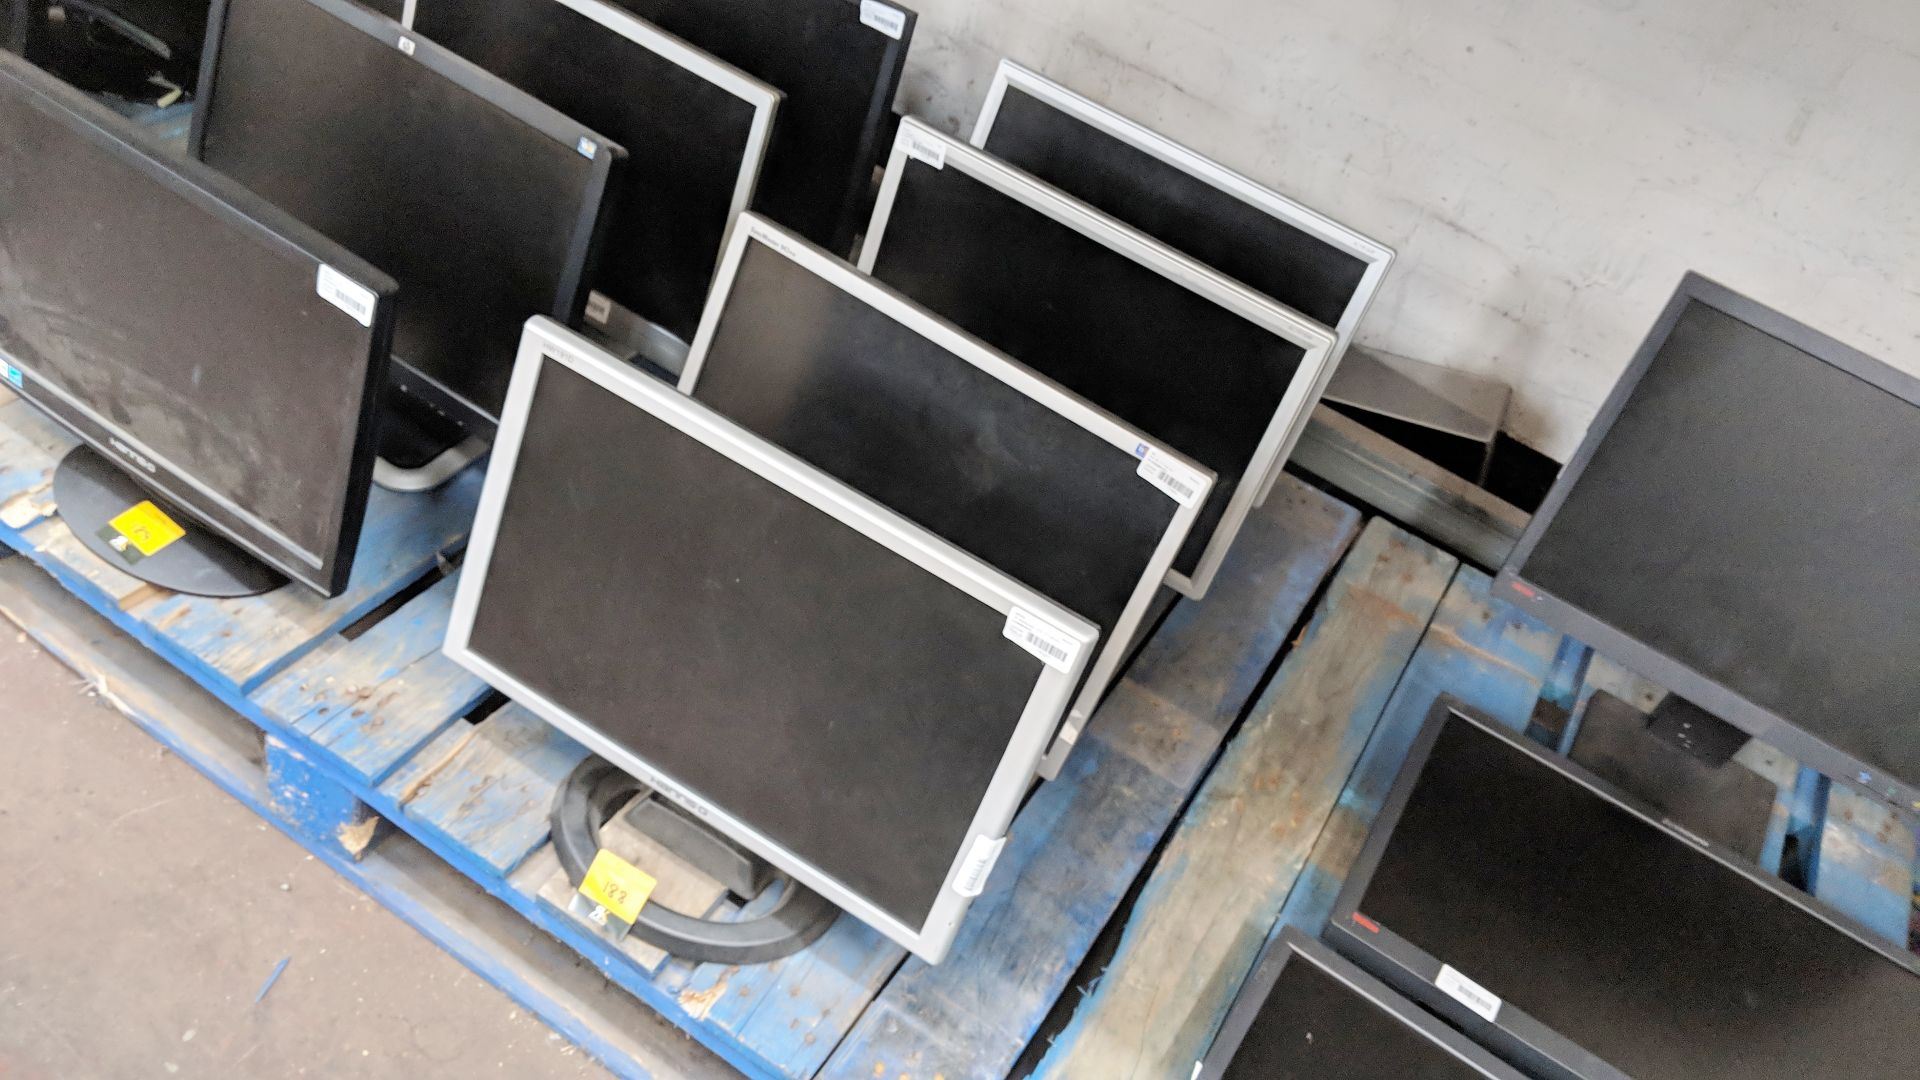 4 off assorted silver surround 19" widescreen LCD monitors IMPORTANT: Please remember goods